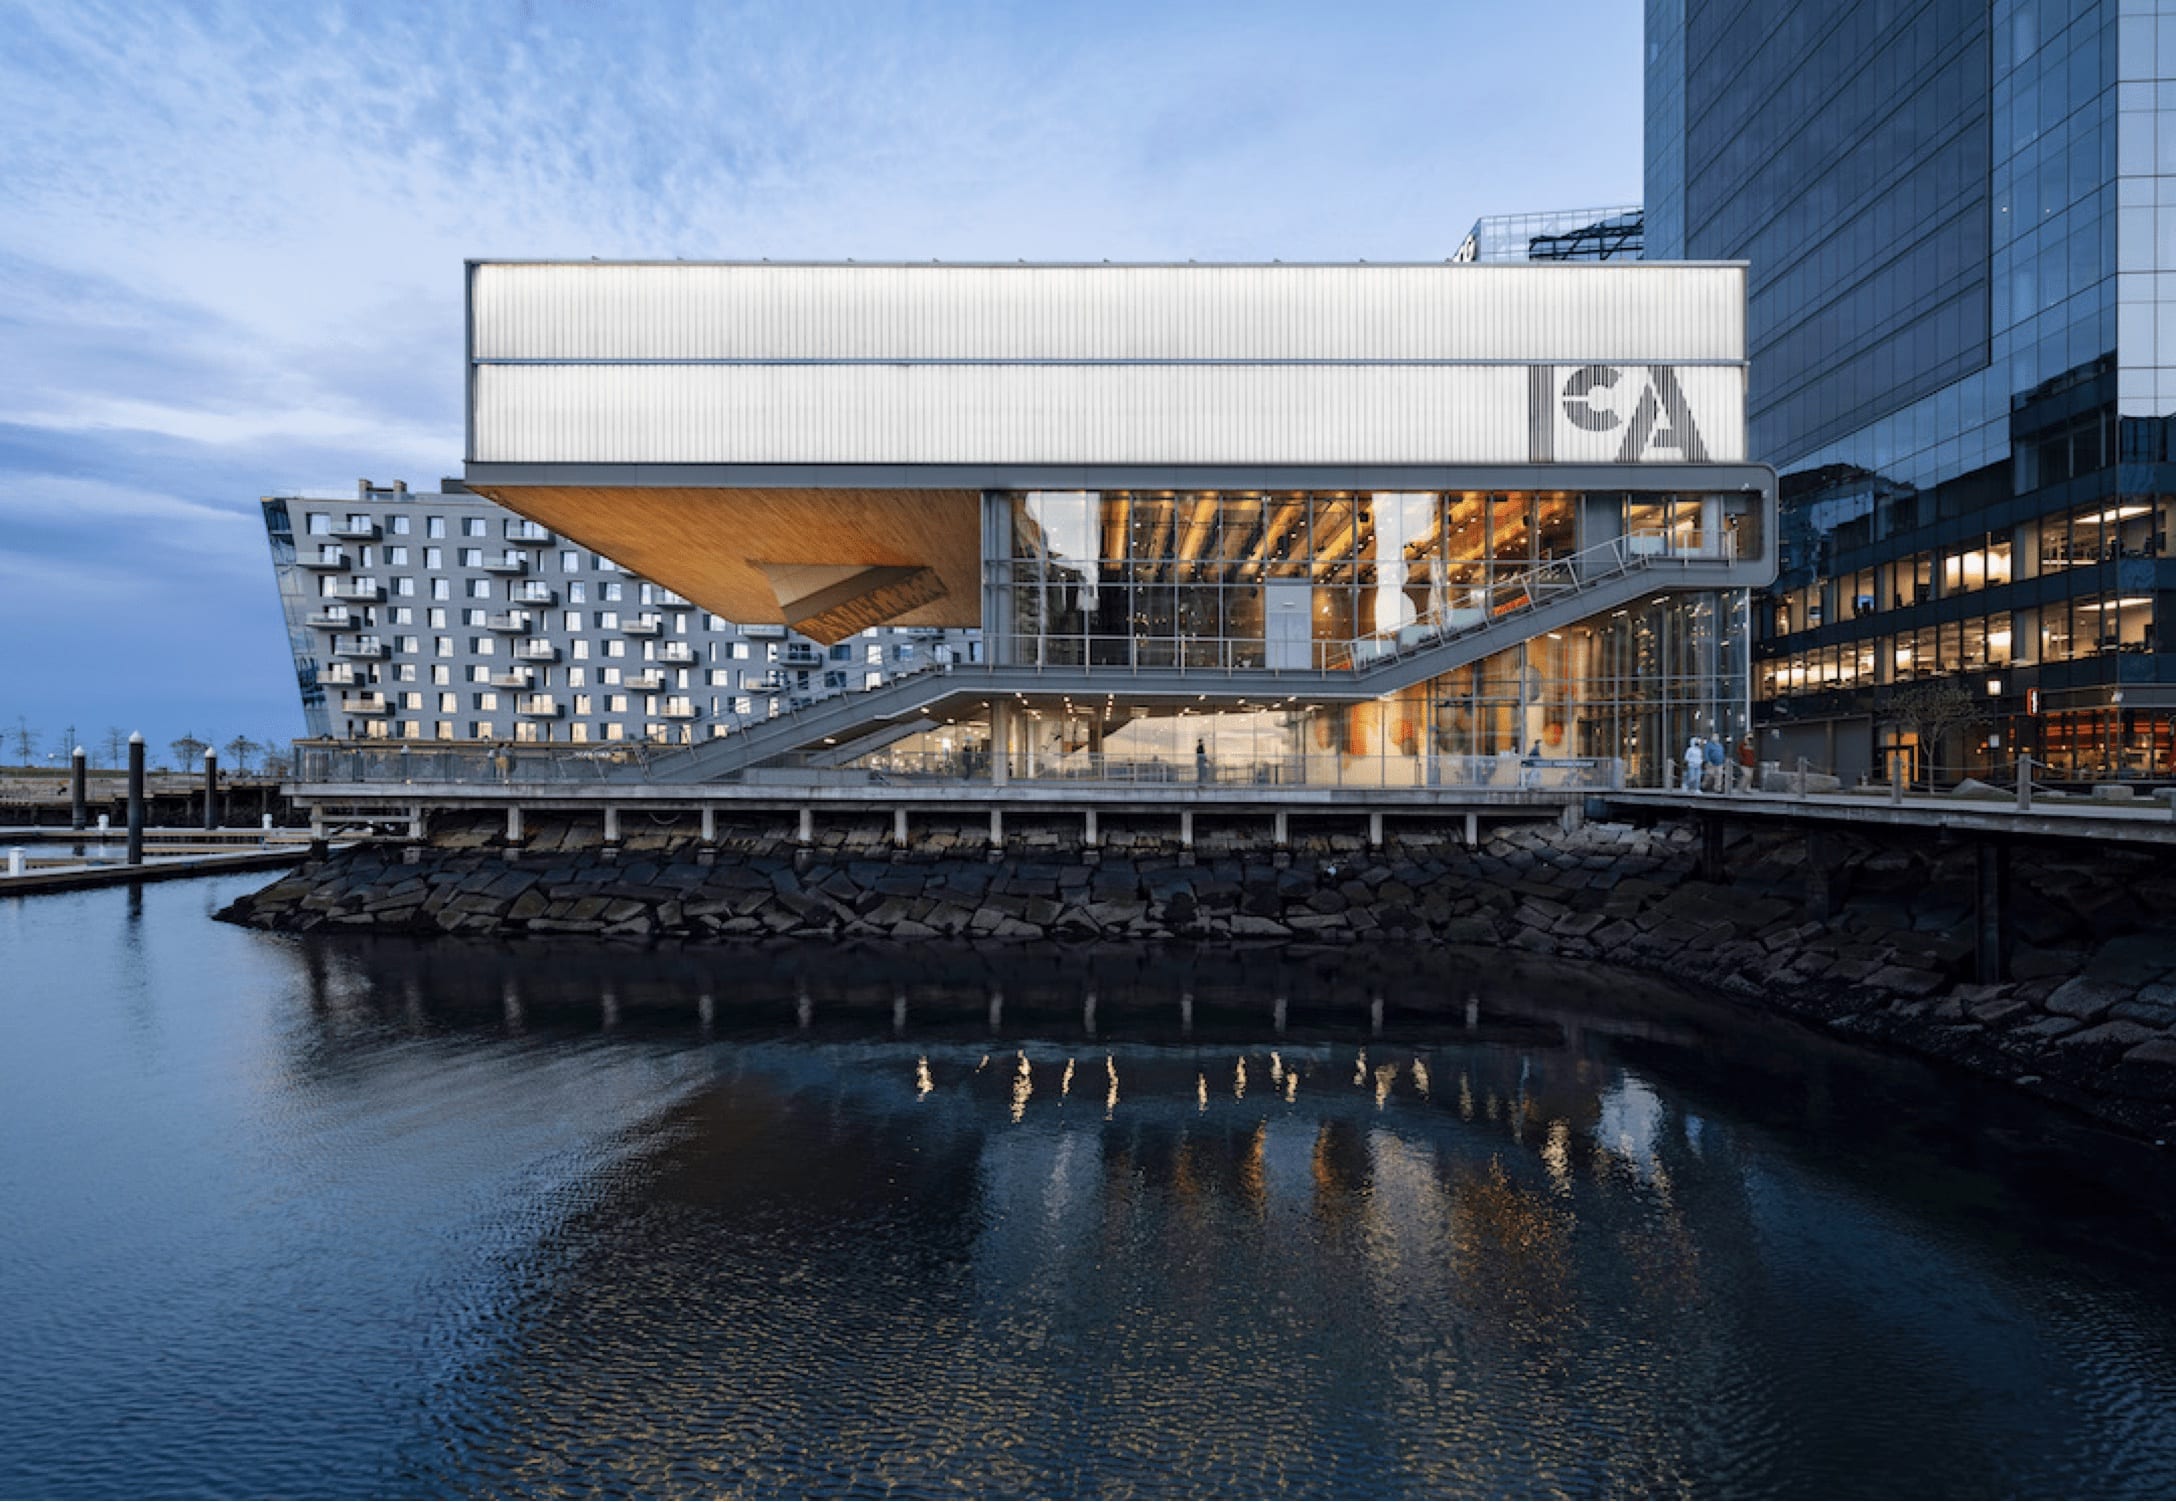 The ICA building at dusk, featuring a glowing top level cantilevered over Boston Harbor and glass-walled theater and lobby spaces lit from within.